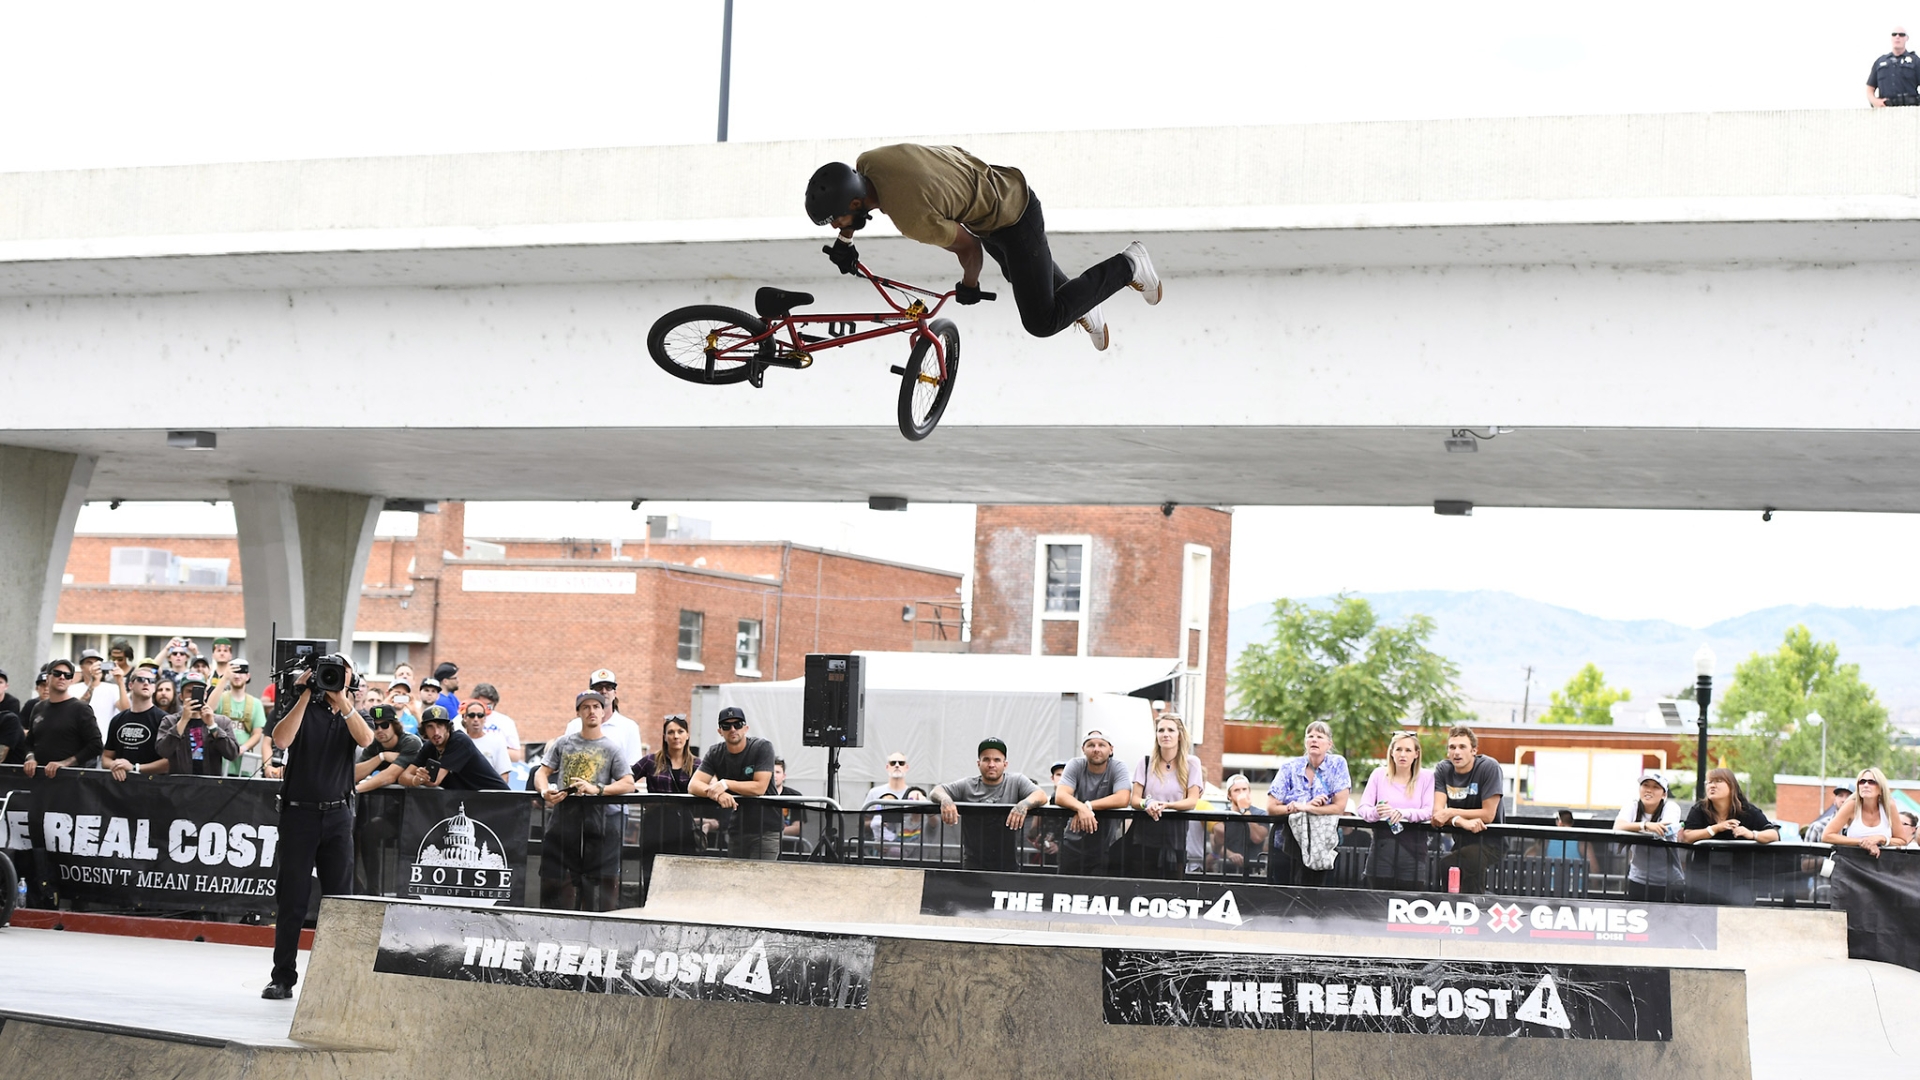 Mykel Larrin wins BMX Park at Road To X Games Boise 2018